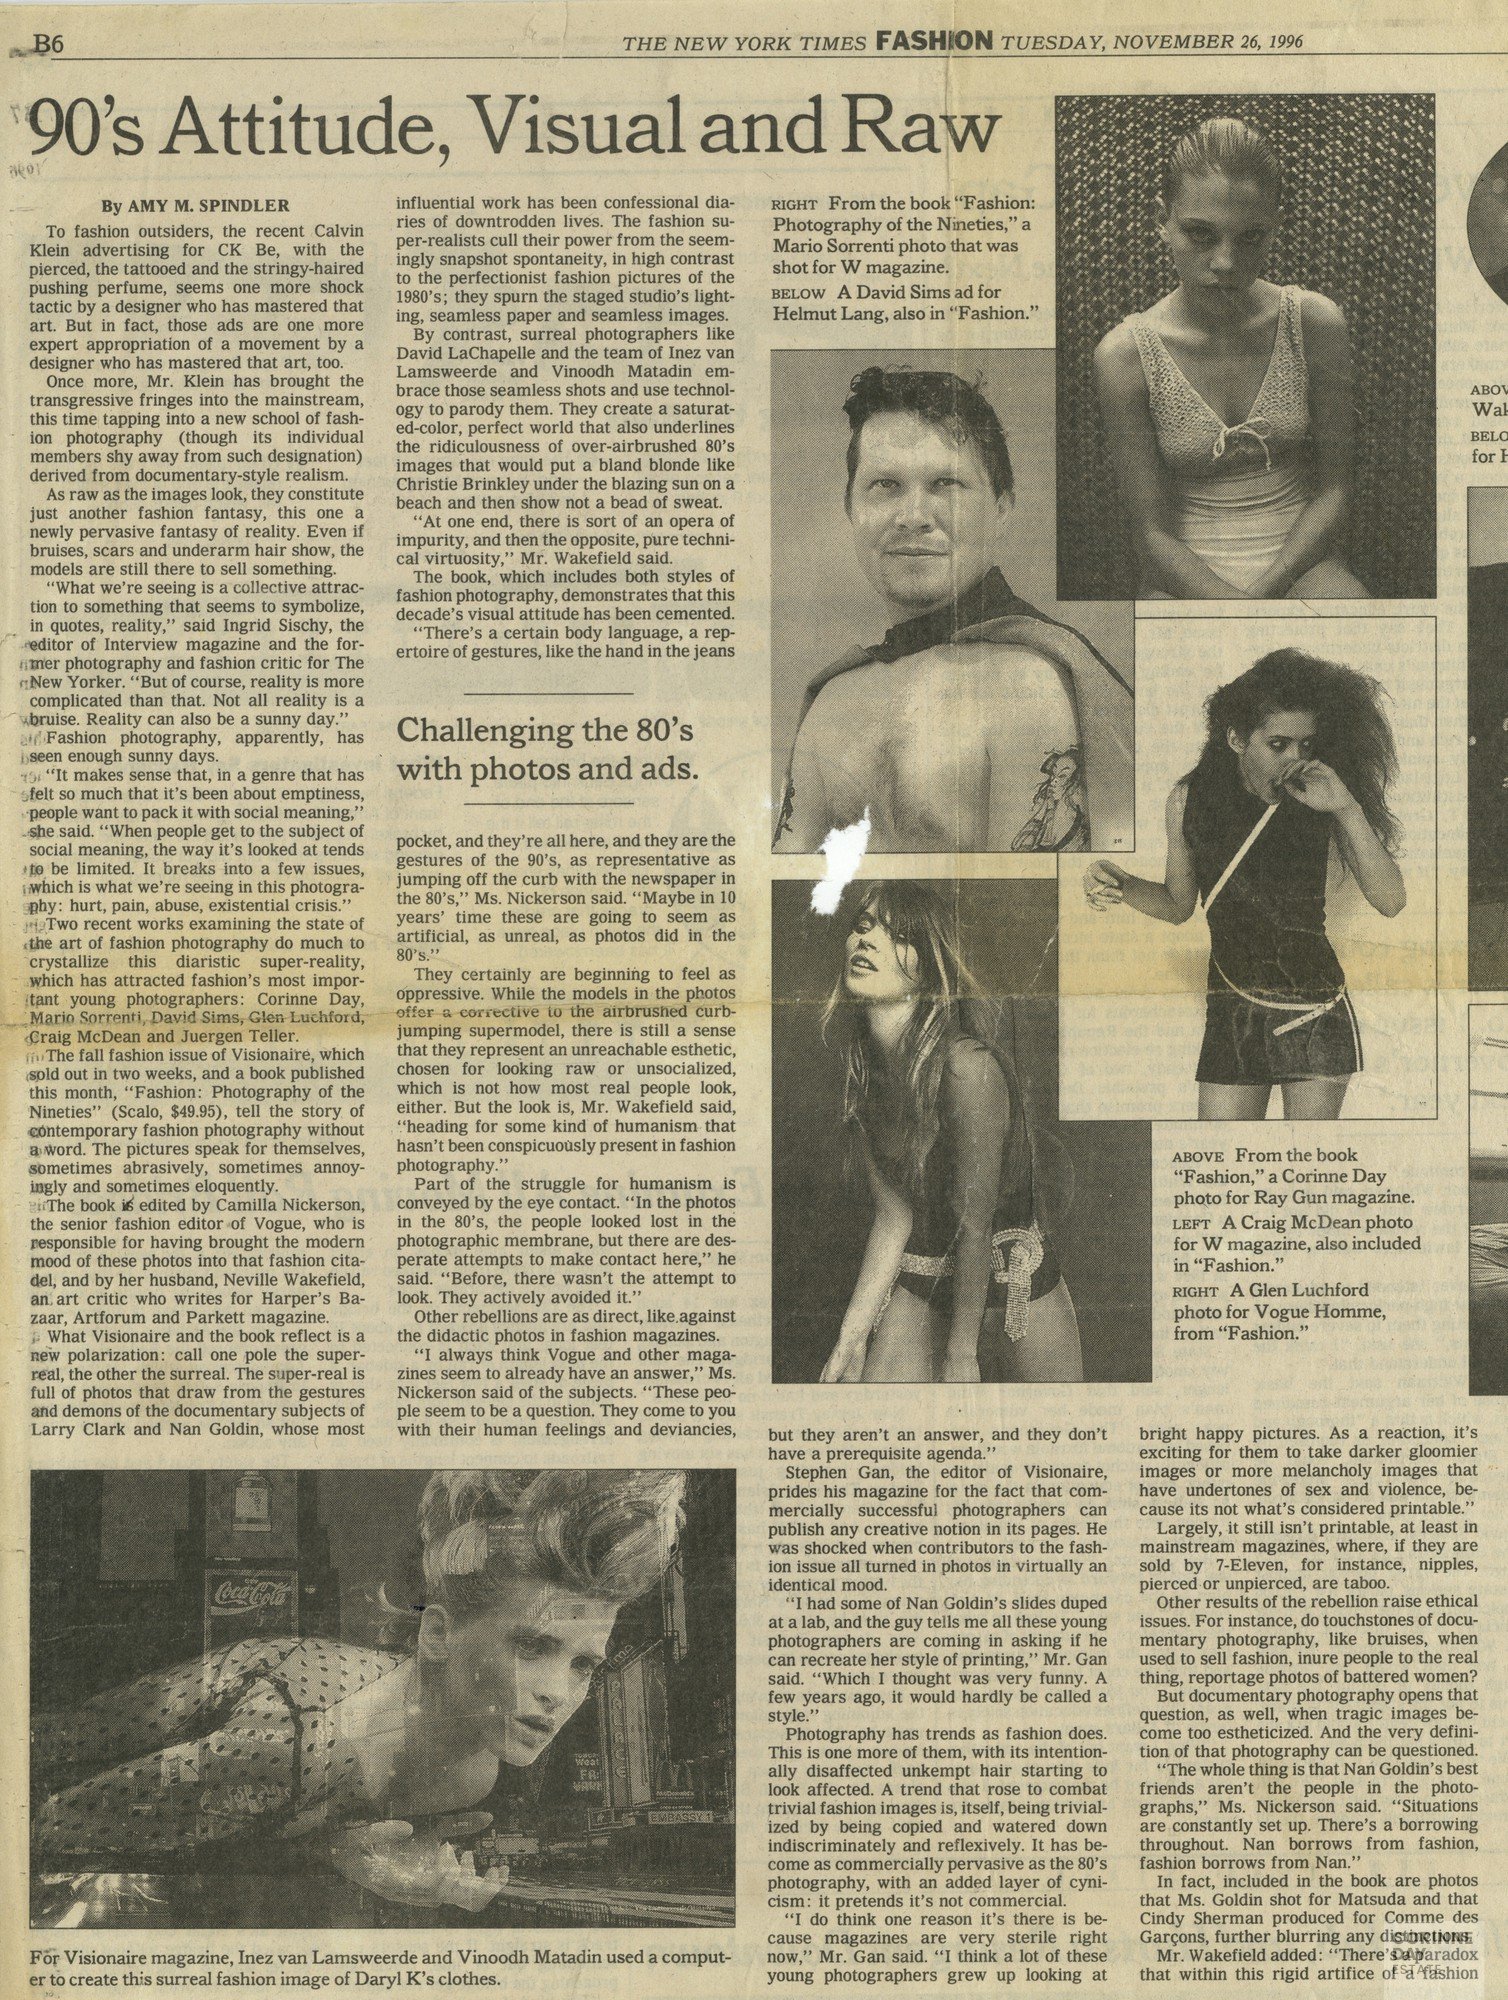 90's Attitude, Visual and Raw, The New York Times, 26 Nov 1996 — Image 1 of 2